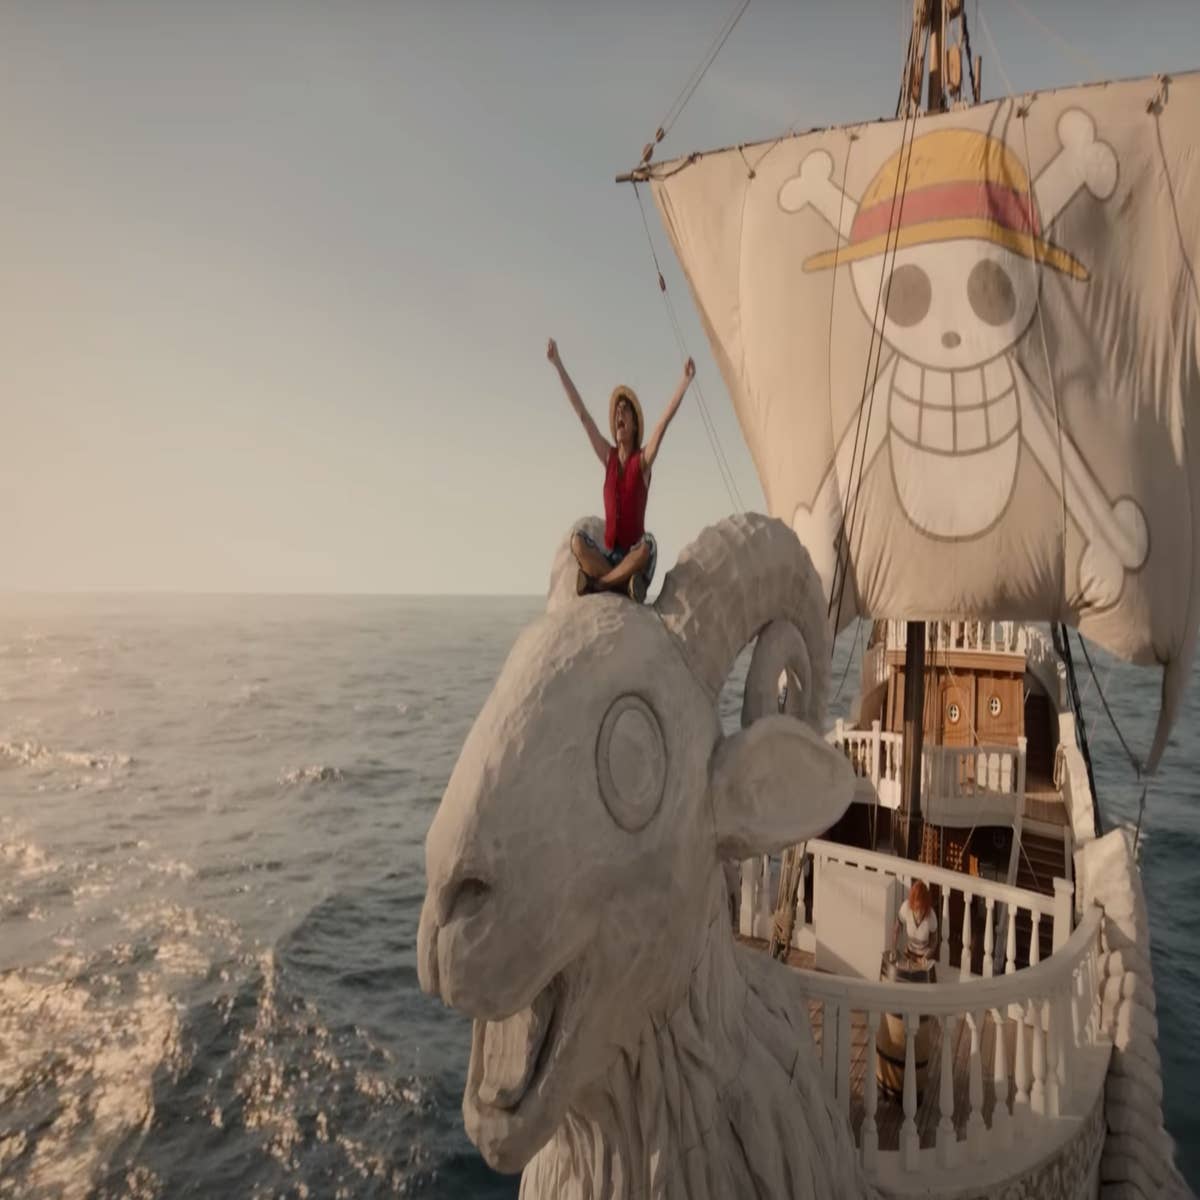 One Piece” episode one is an awesome start to the live-action